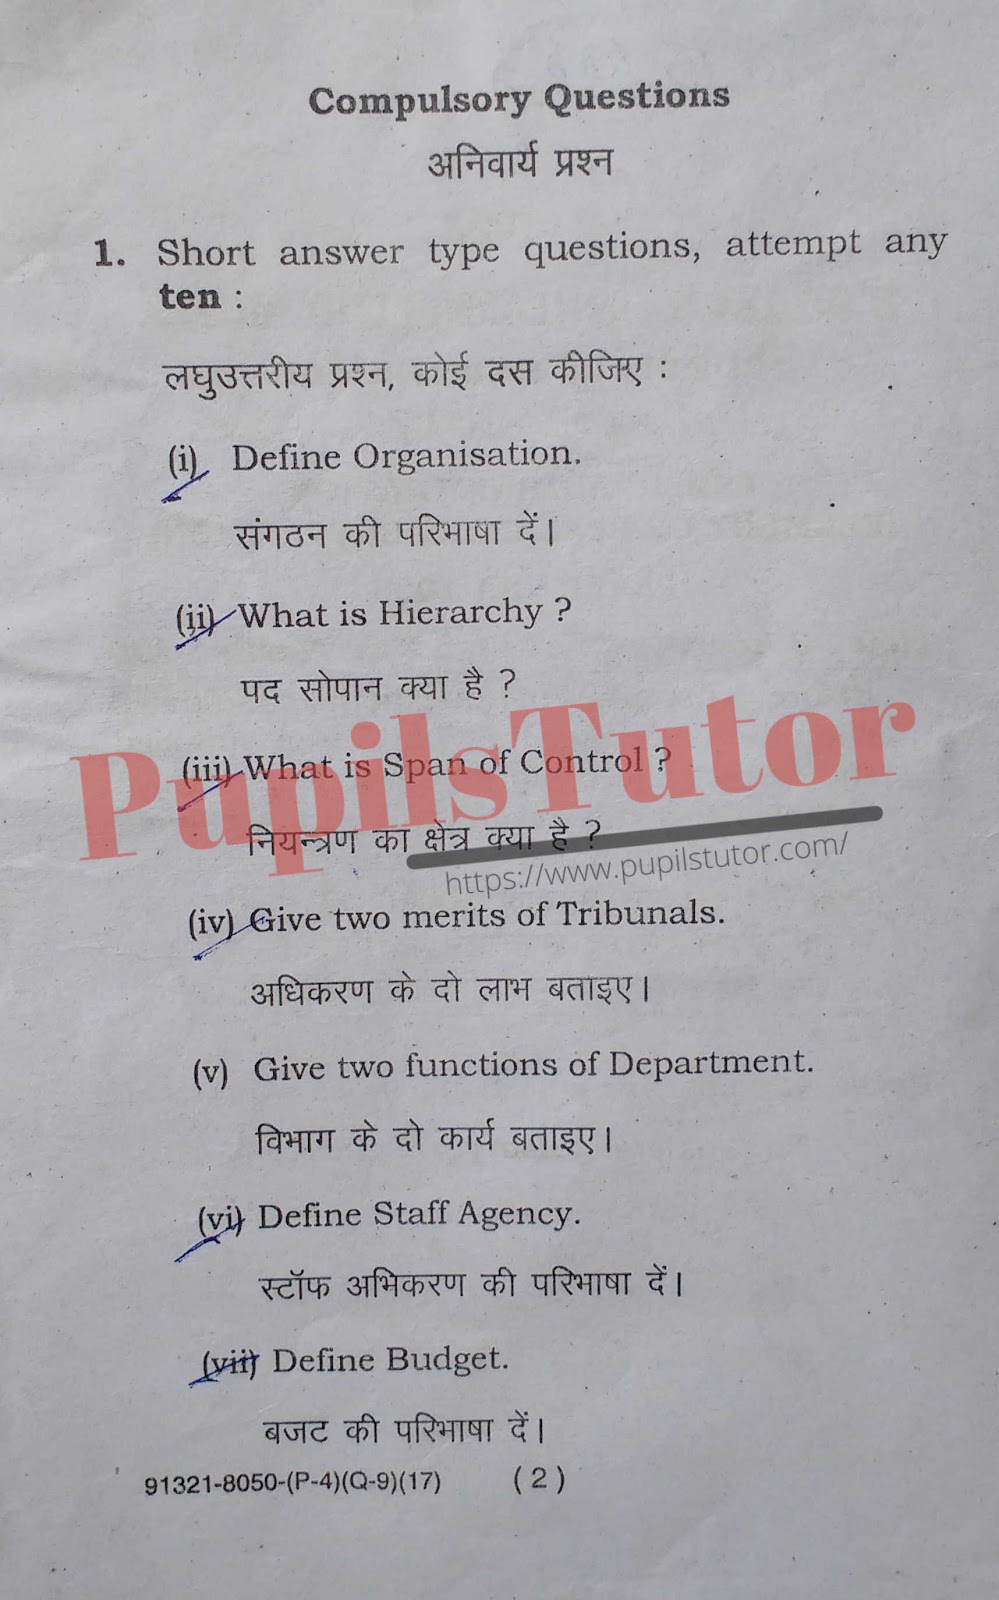 M.D. University B.A. Elements Of Public Administration First Year Important Question Answer And Solution - www.pupilstutor.com (Paper Page Number 2)